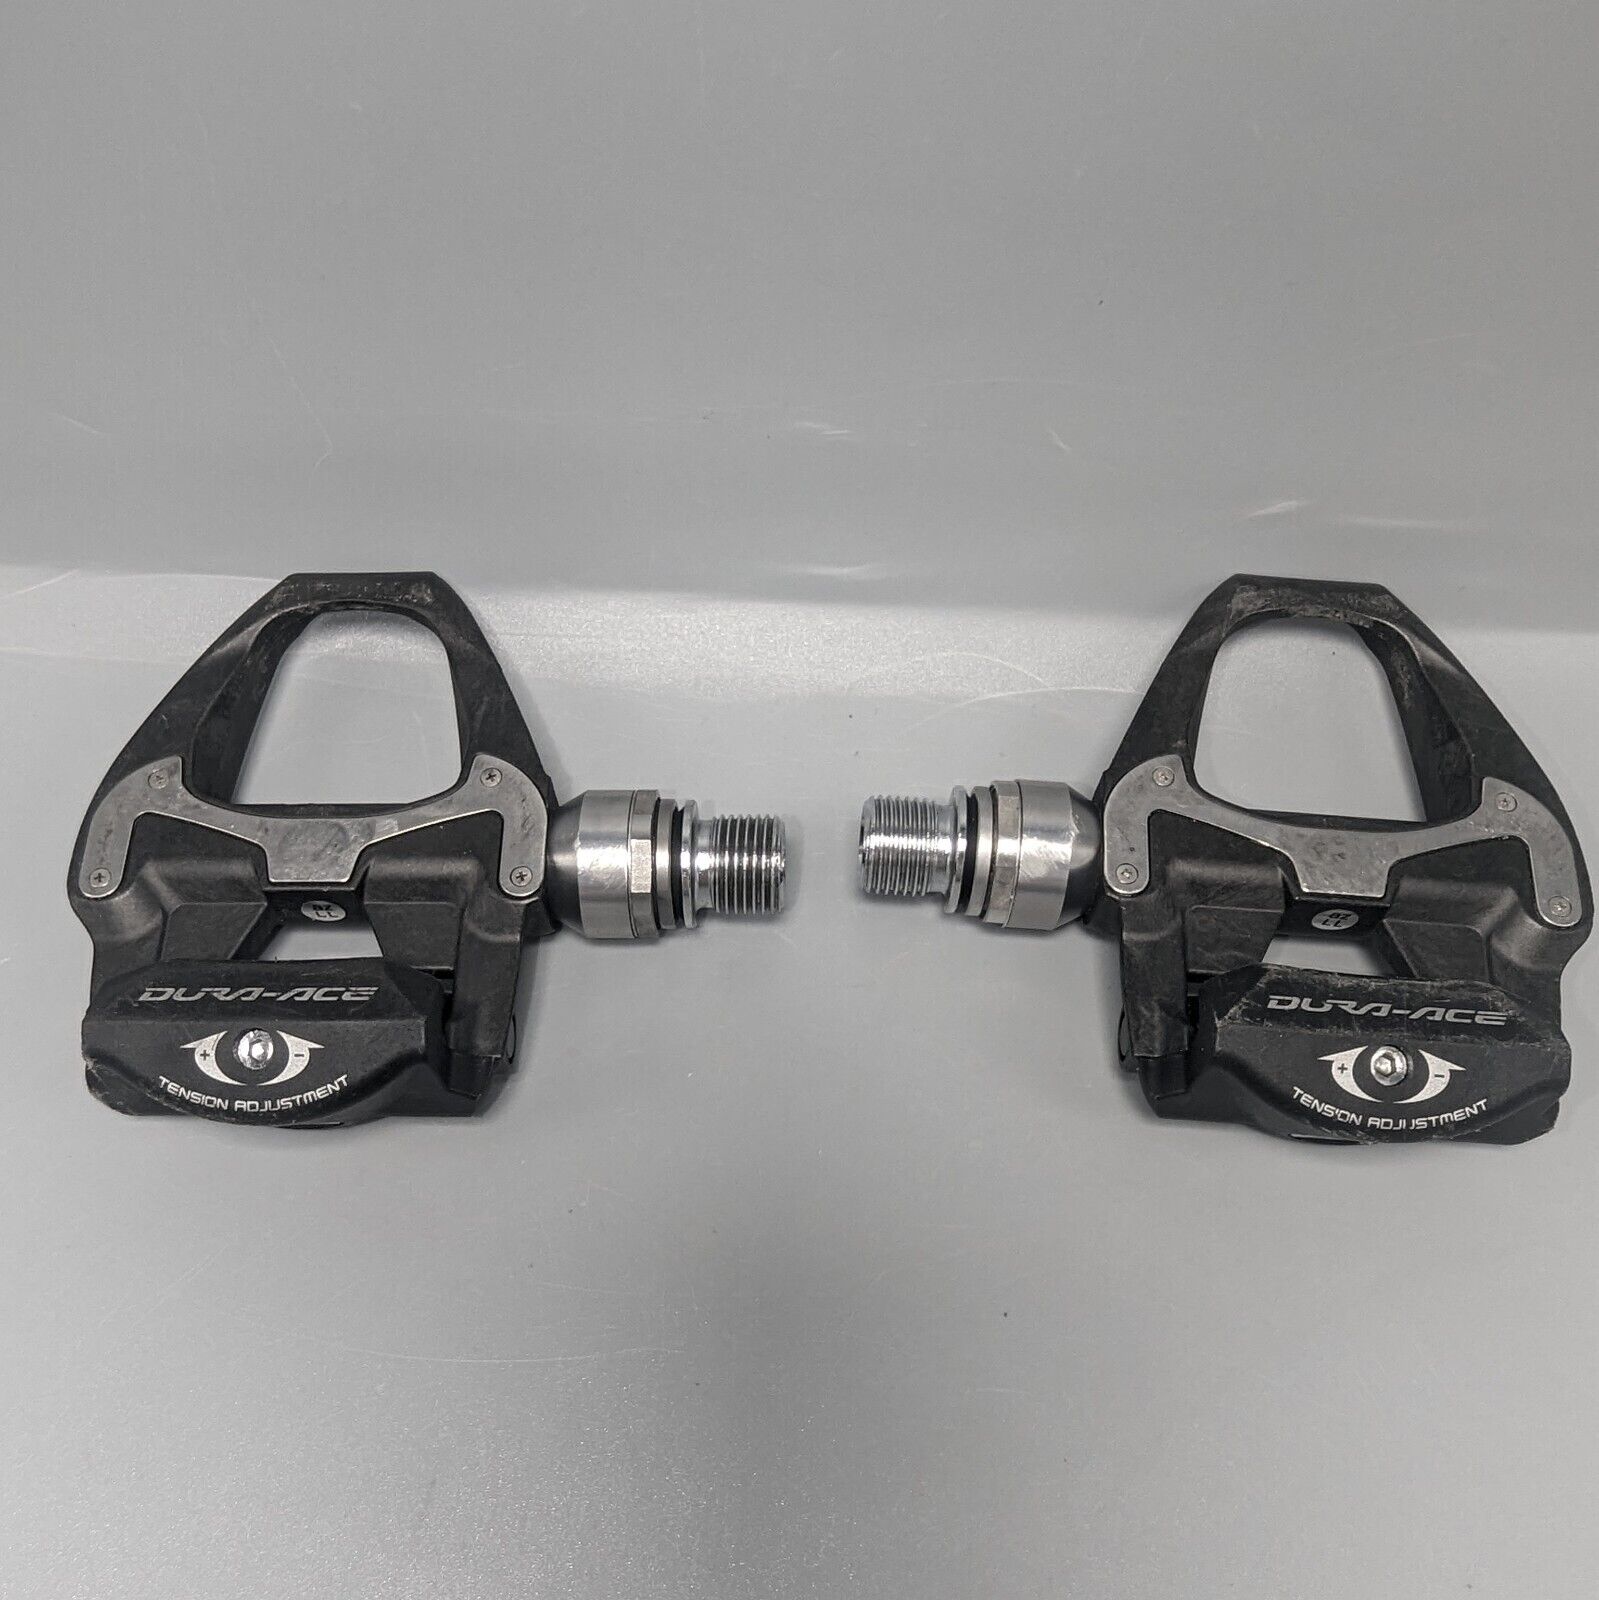 Shimano DURA-ACE 9000 PD-9000 SPD-SL Road Pedals EXCELLENT USED